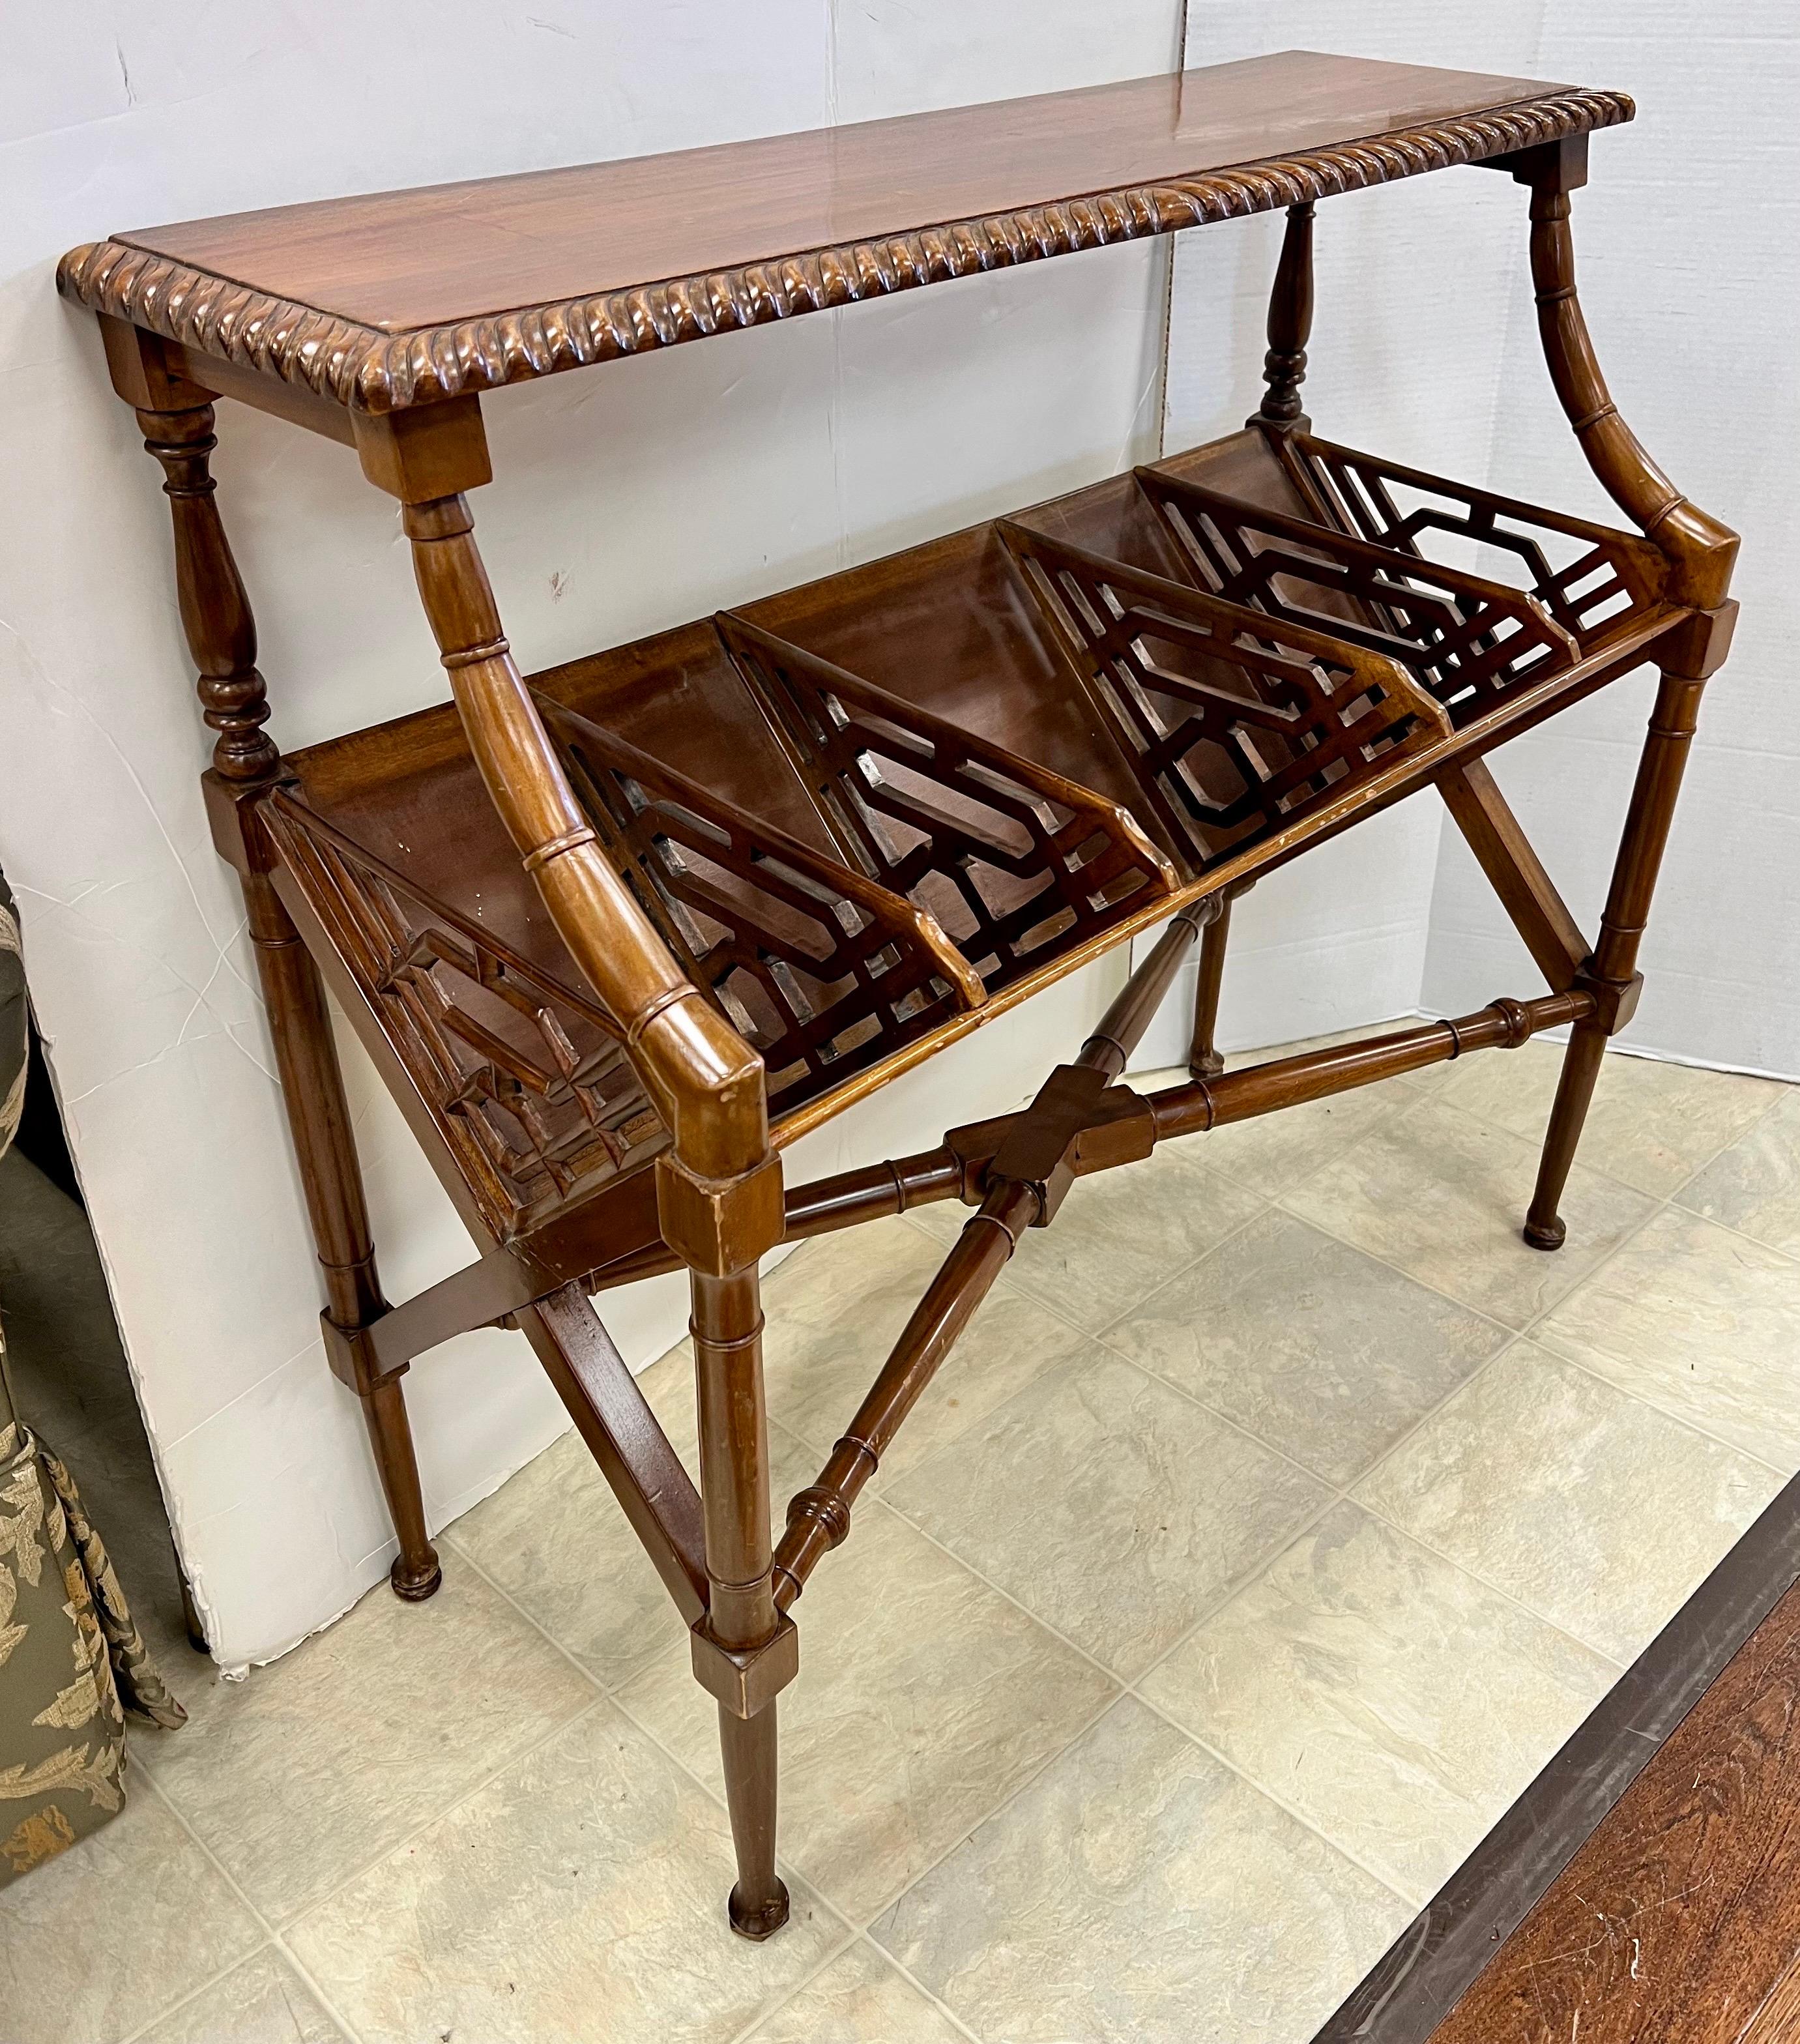 Vintage mahogany book trough or console table with faux bamboo details. Features five divisions separated by fretwork panels over x-base stretchers.